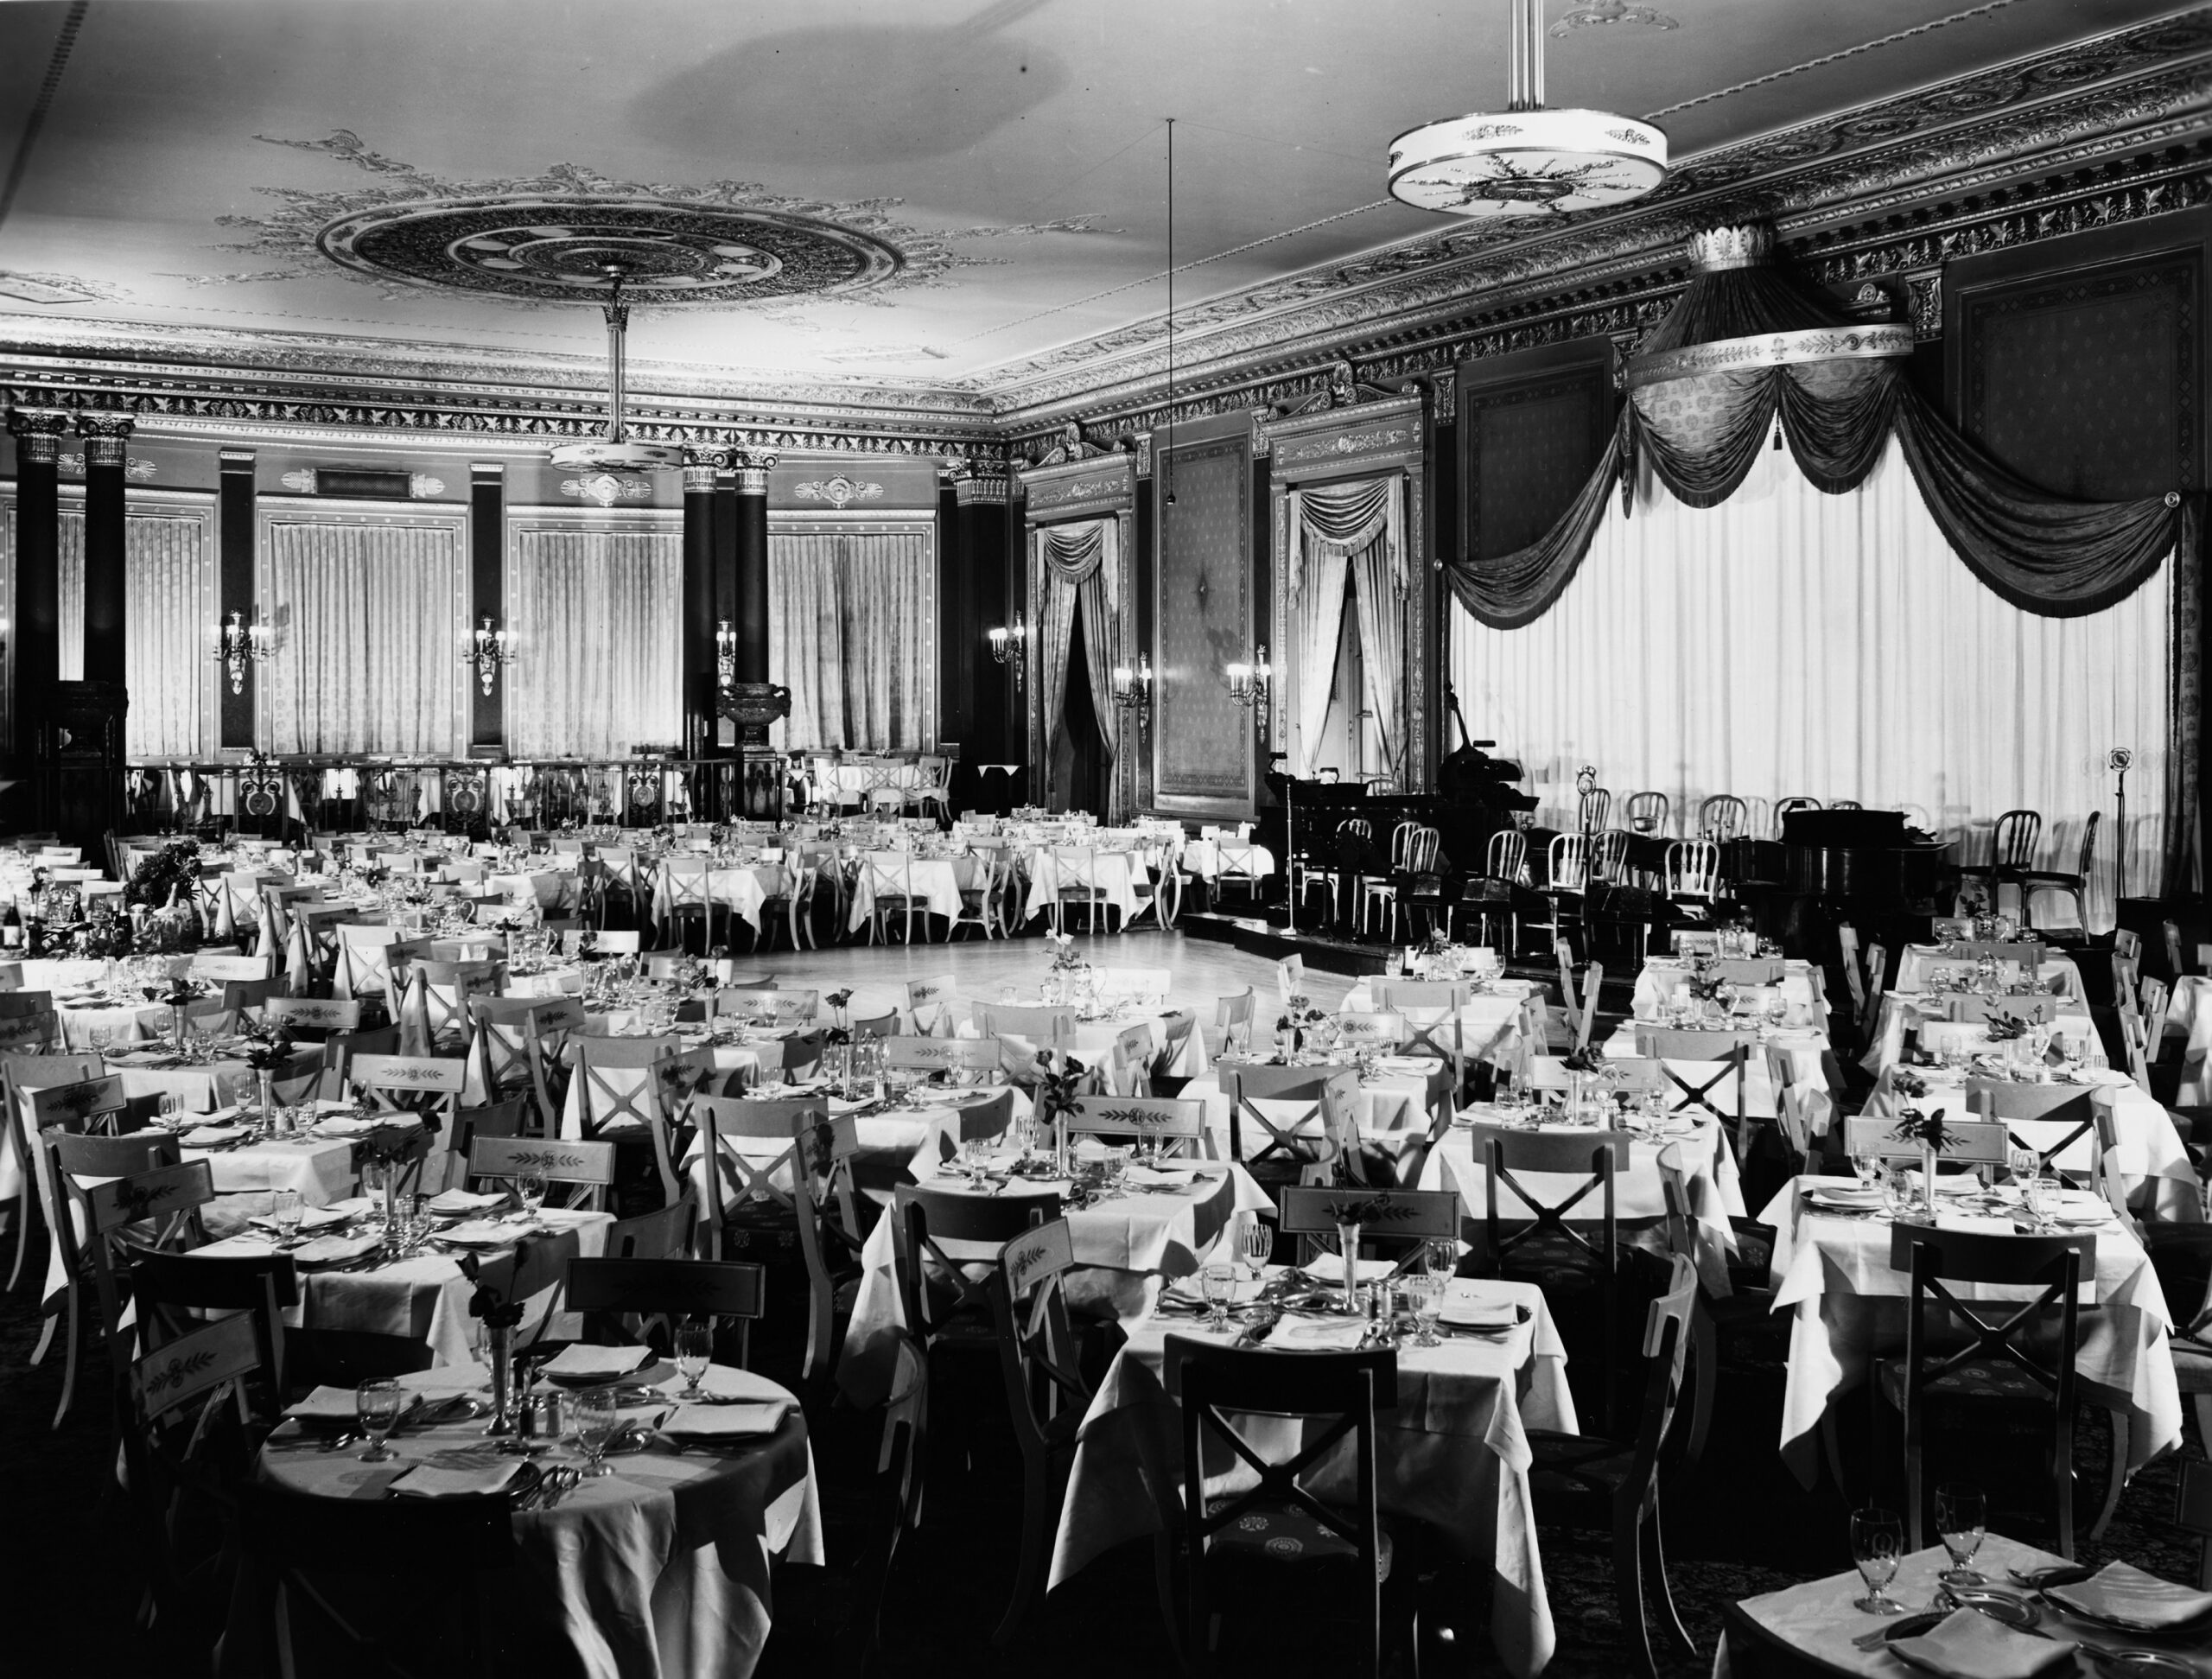 Interior view of the Empire Room, showing tables and chairs in correct positions, an event space inside the Palmer House hotel, in Chicago, Illinois, circa June 4-8, 1936.